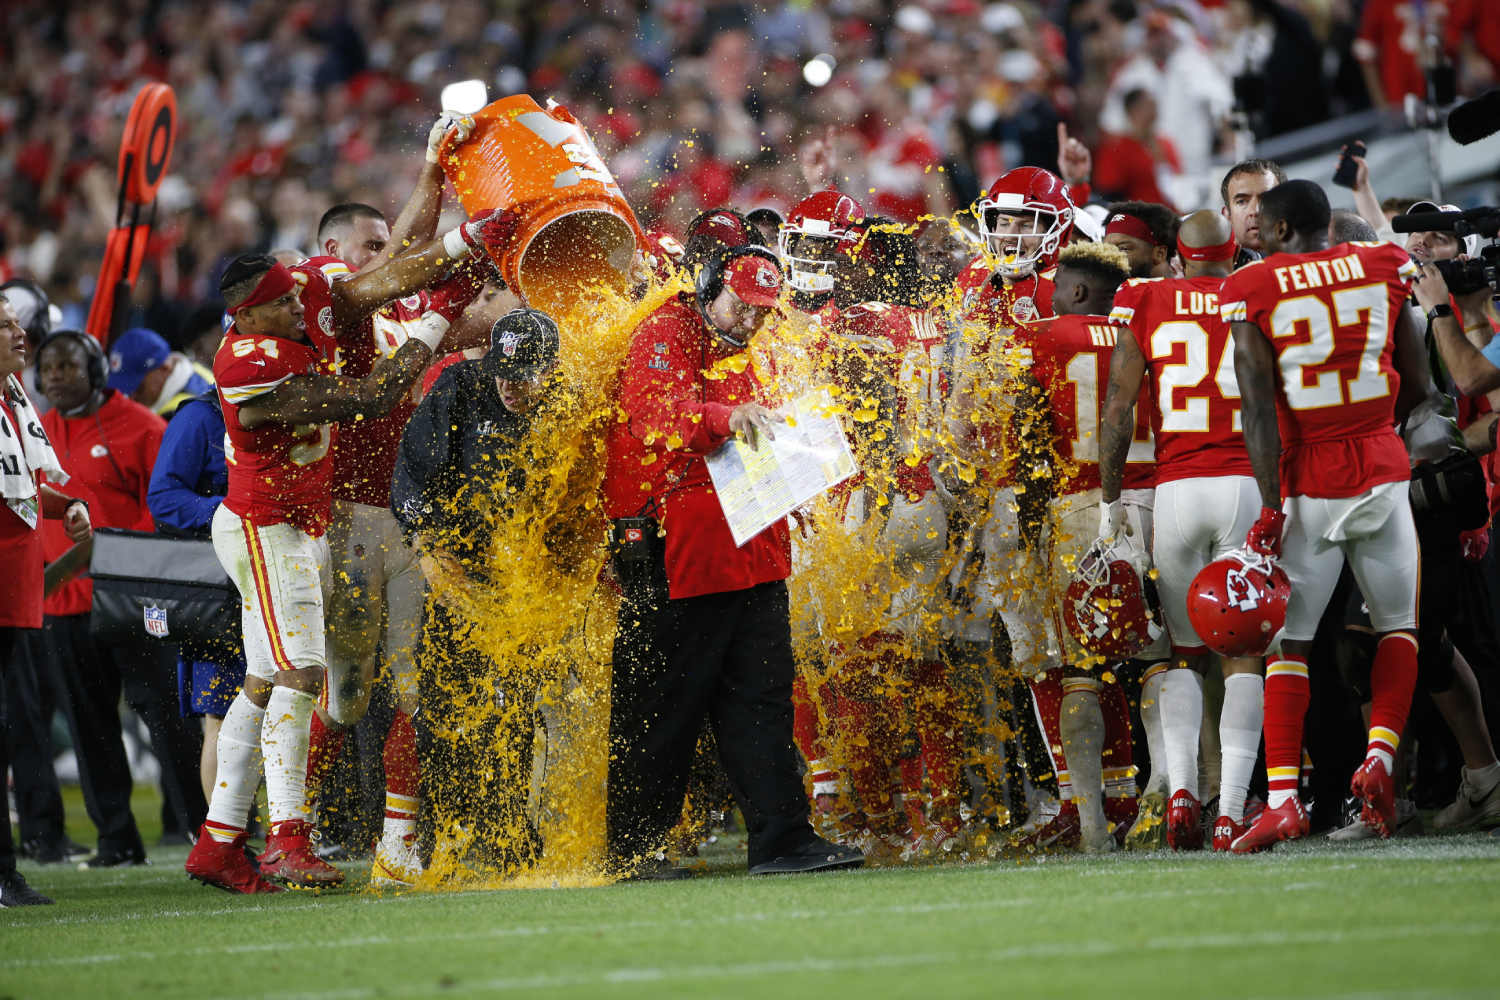 When Did the Tradition of Showering Coaches With Gatorade Begin?